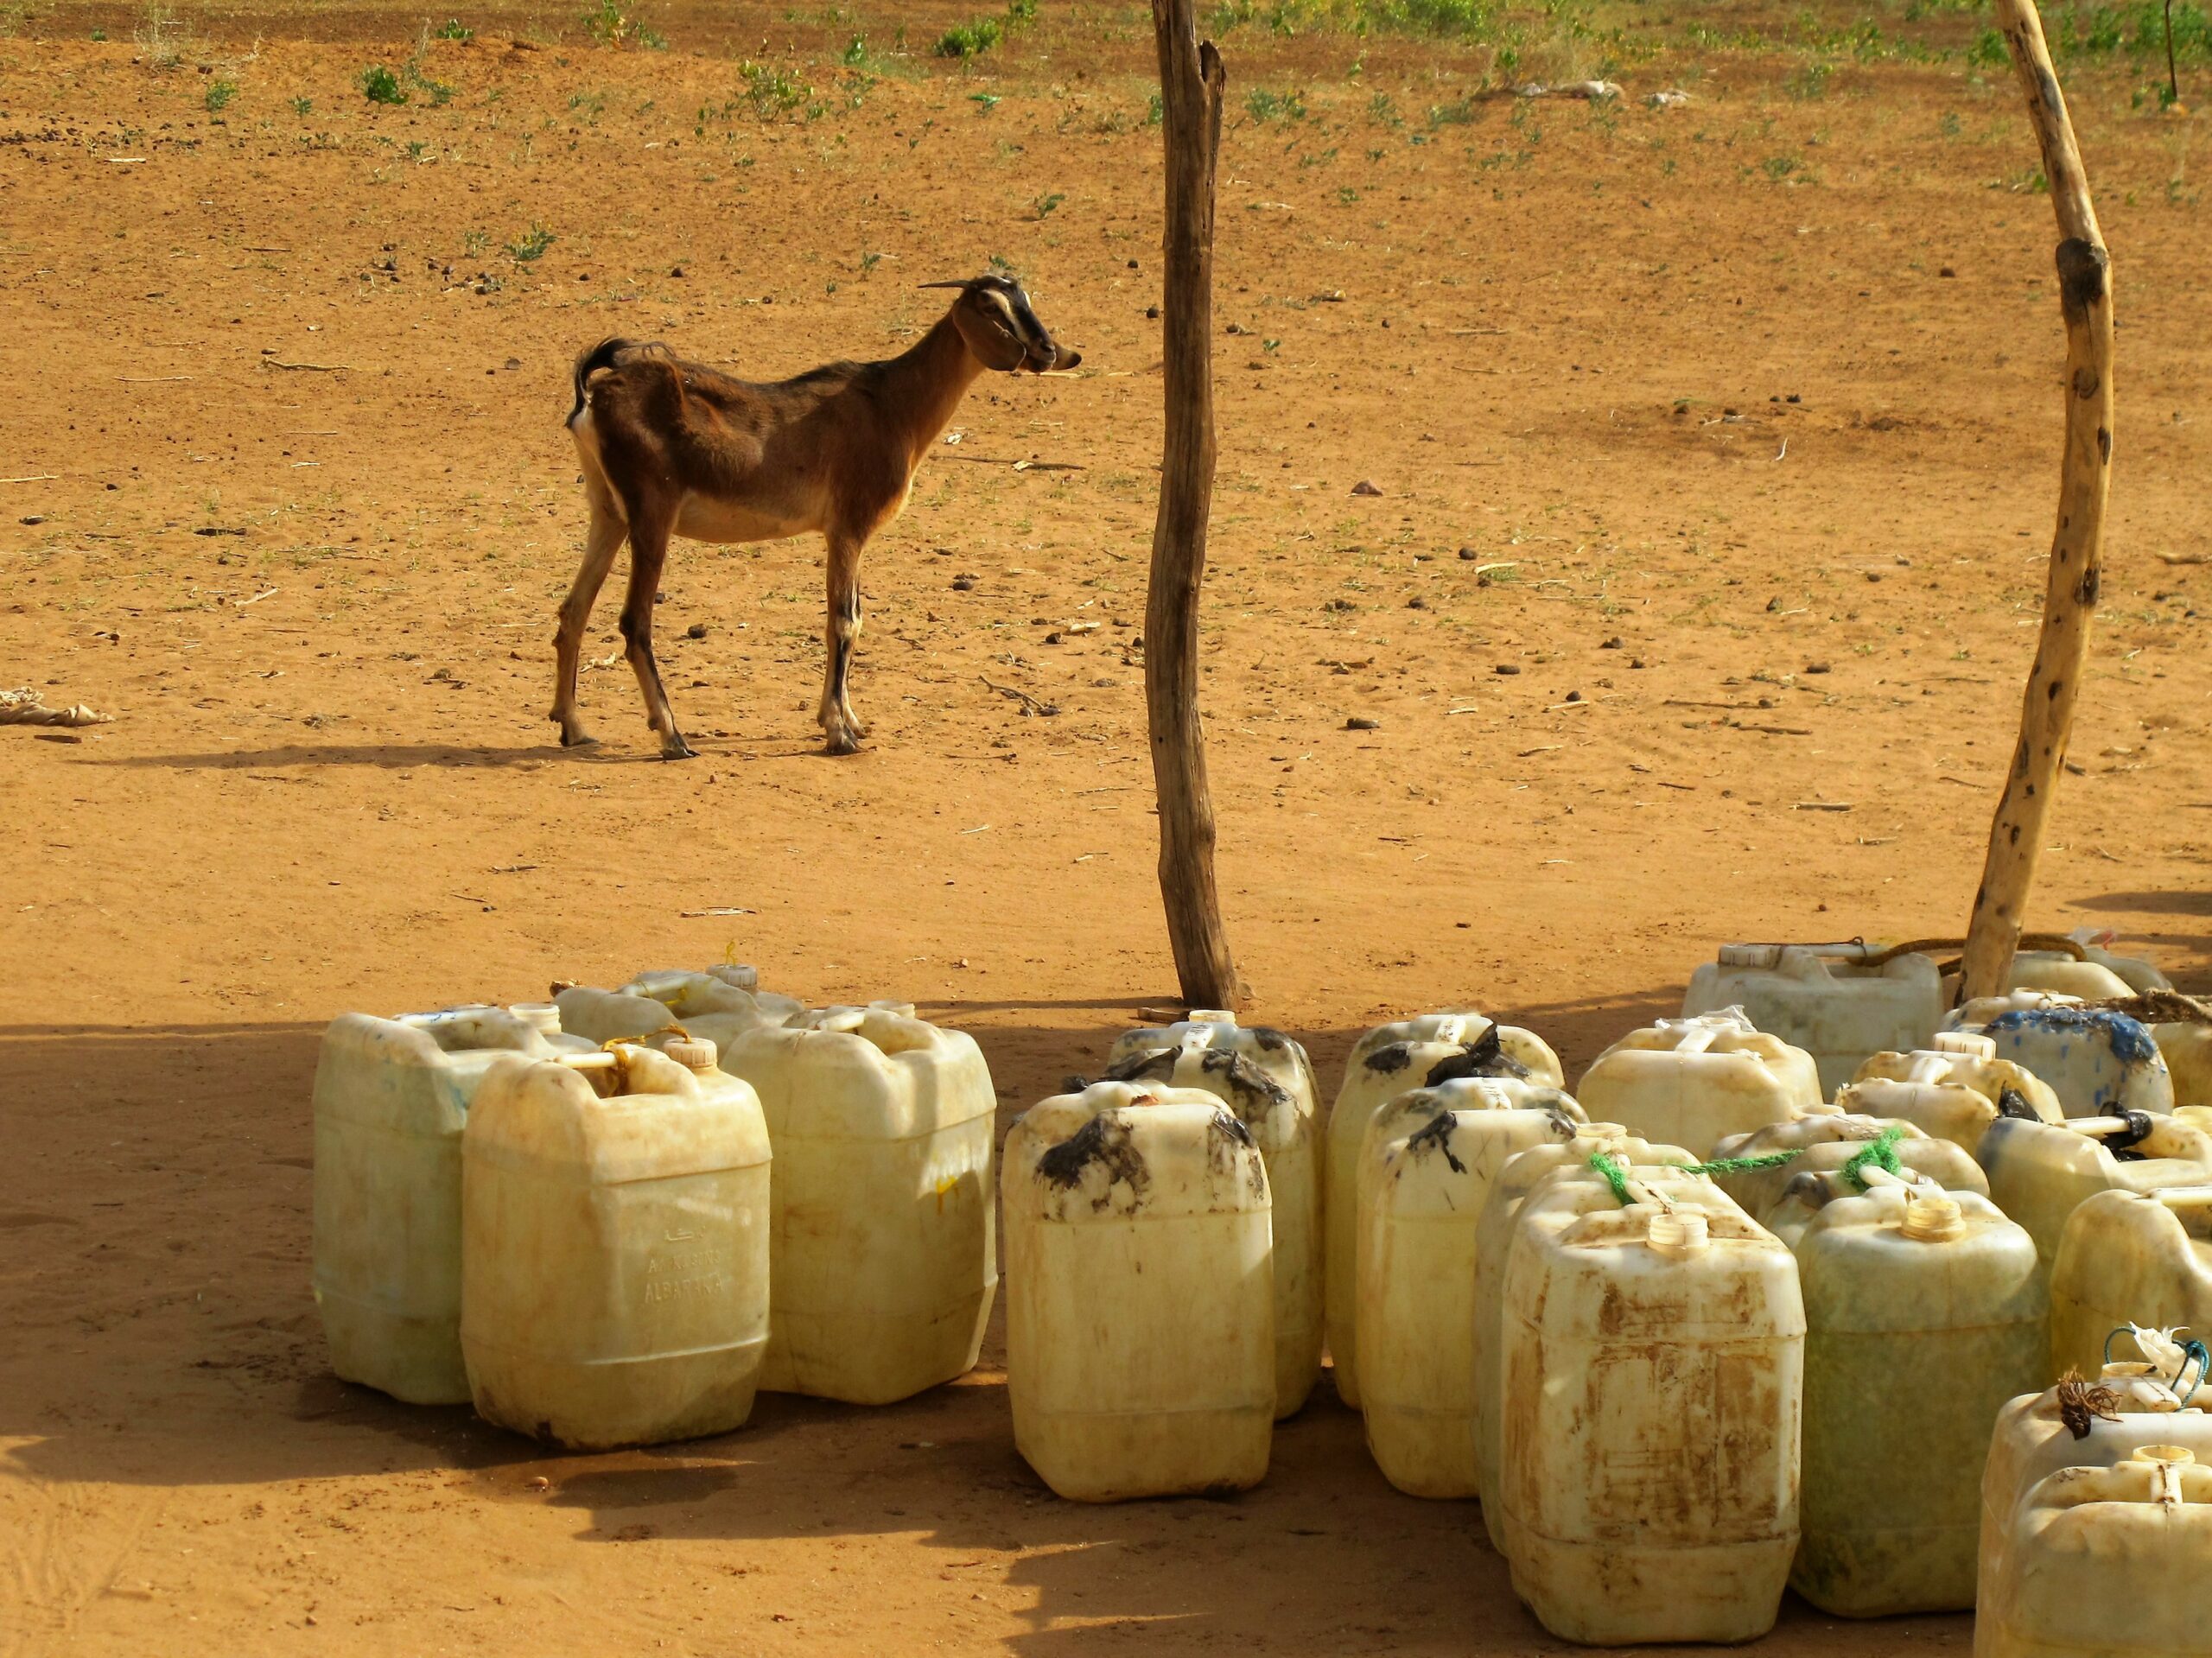 goat behind water cannisters – good photo